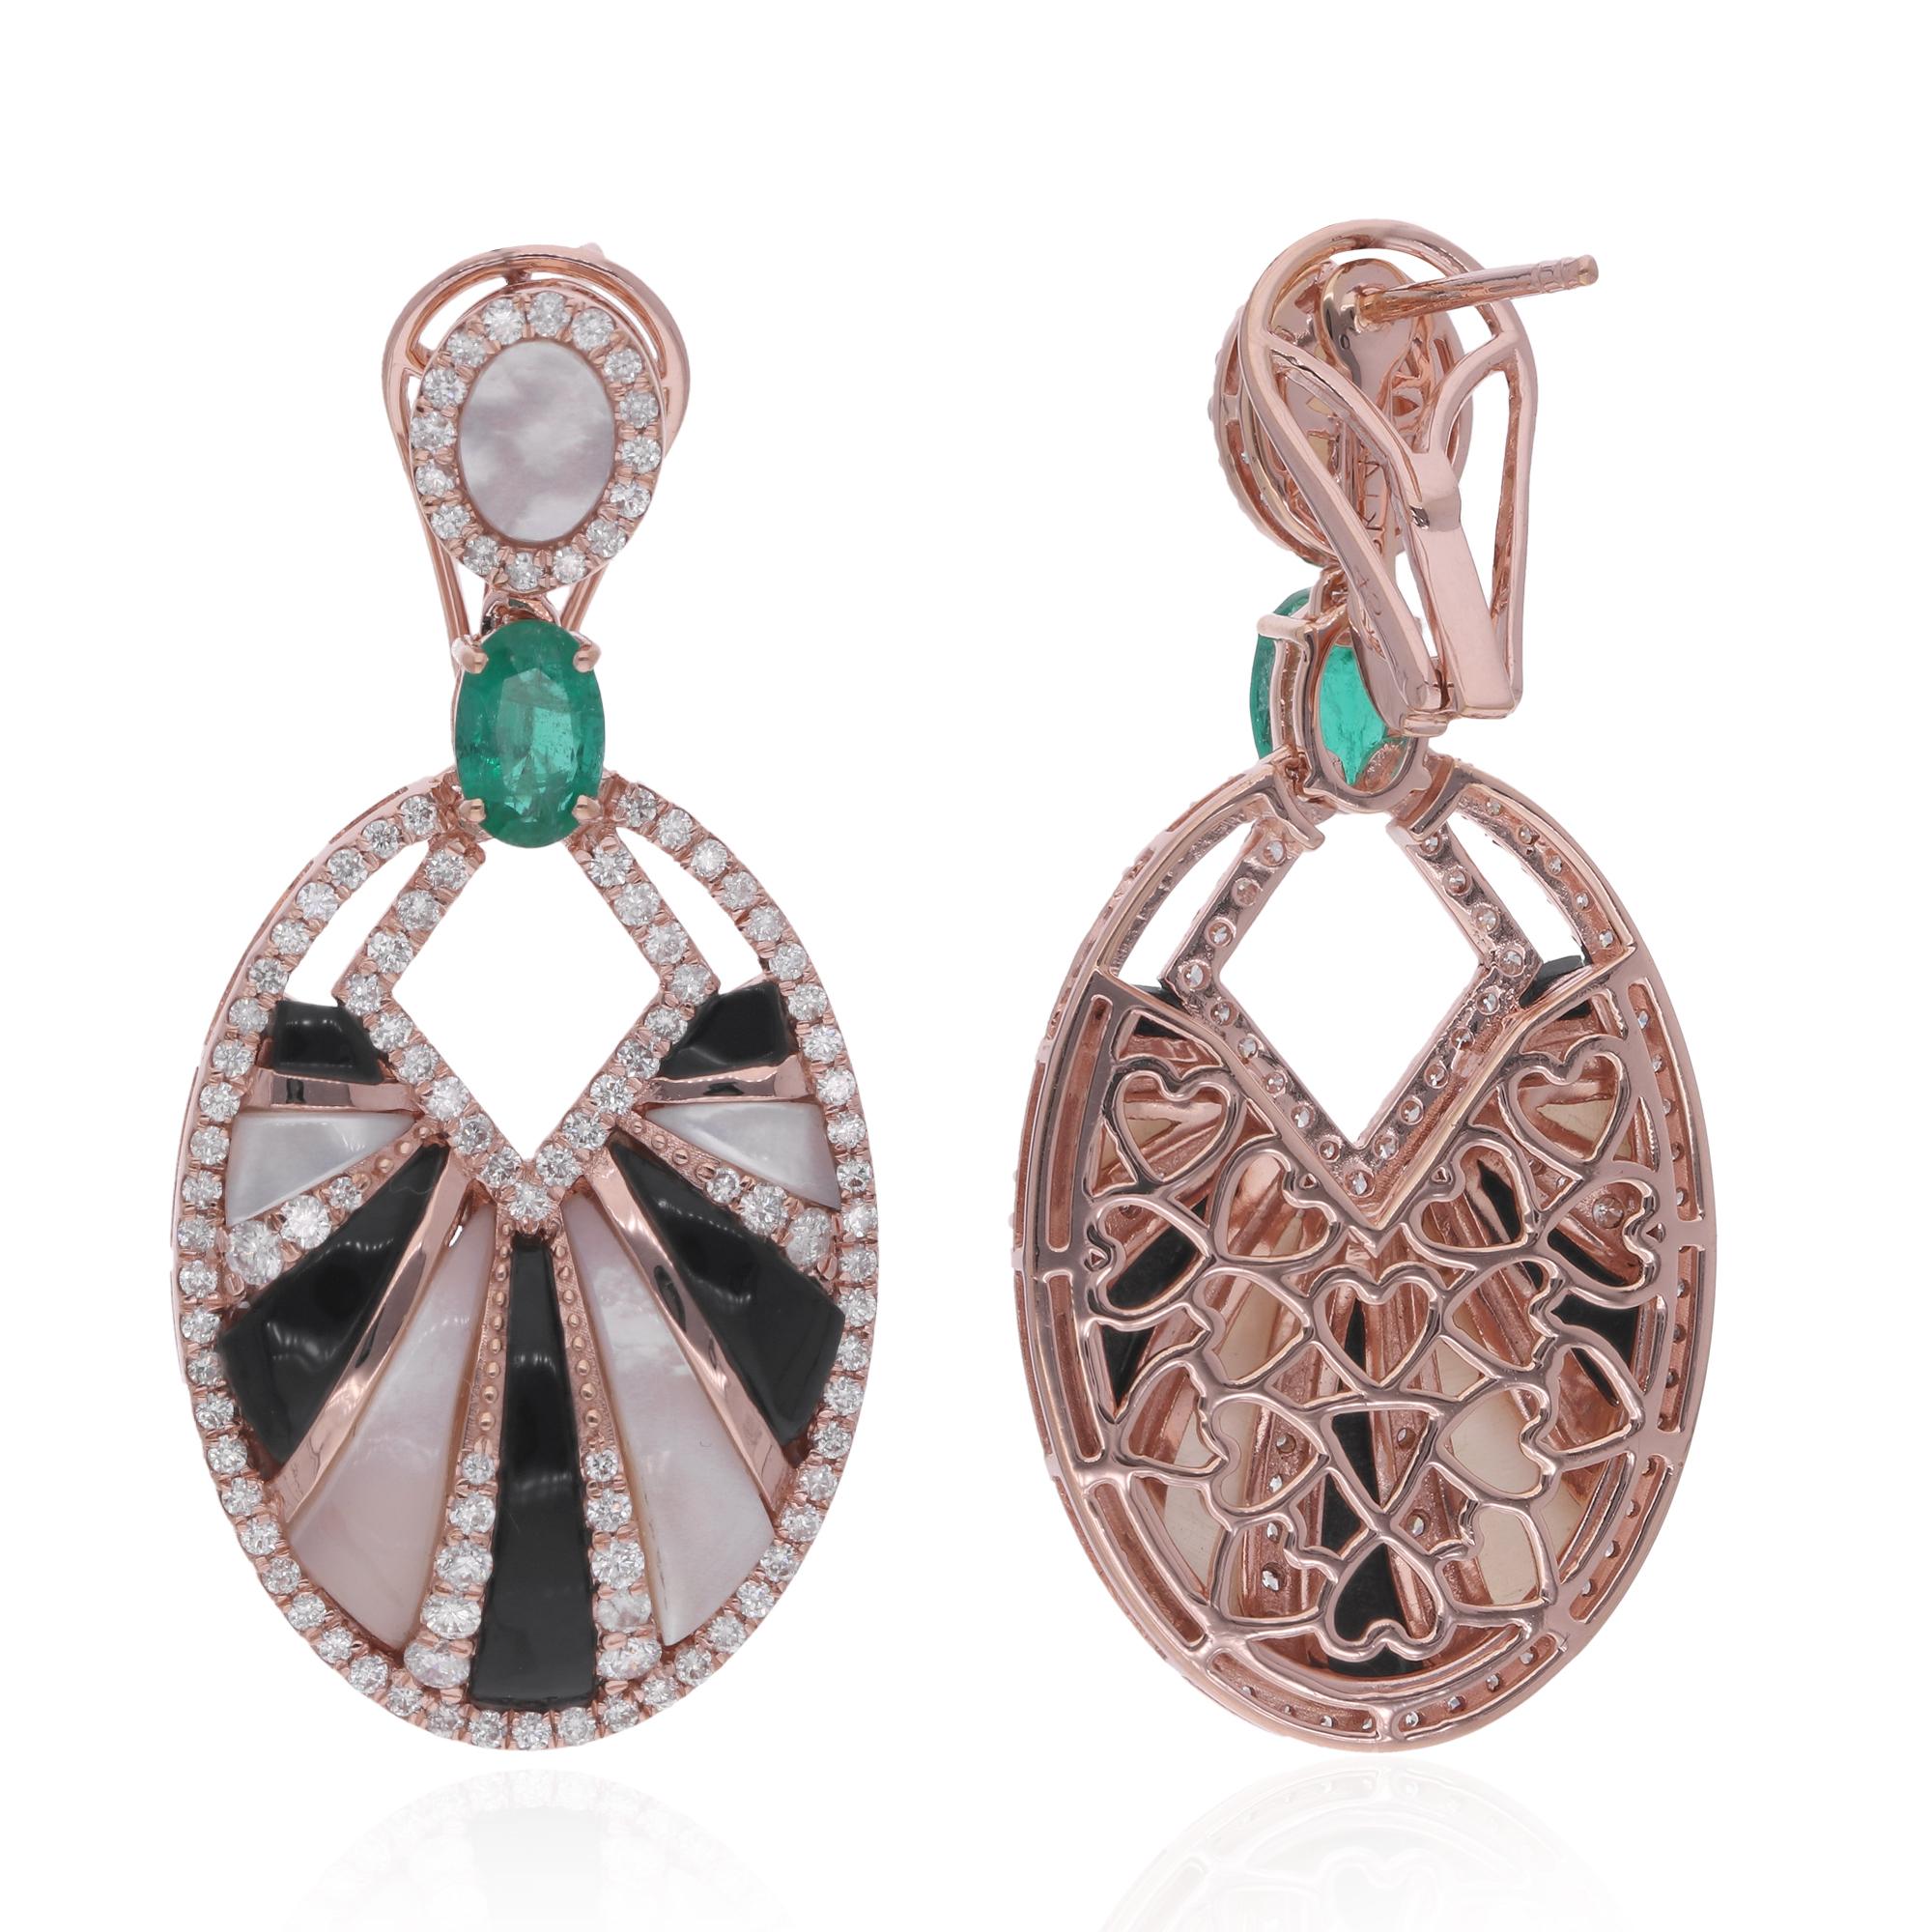 The dangle design of the earrings adds movement and grace, allowing the gemstones to catch the light from every angle and shimmer with radiant beauty. Whether worn for a formal event or to add a touch of glamour to everyday attire, these earrings